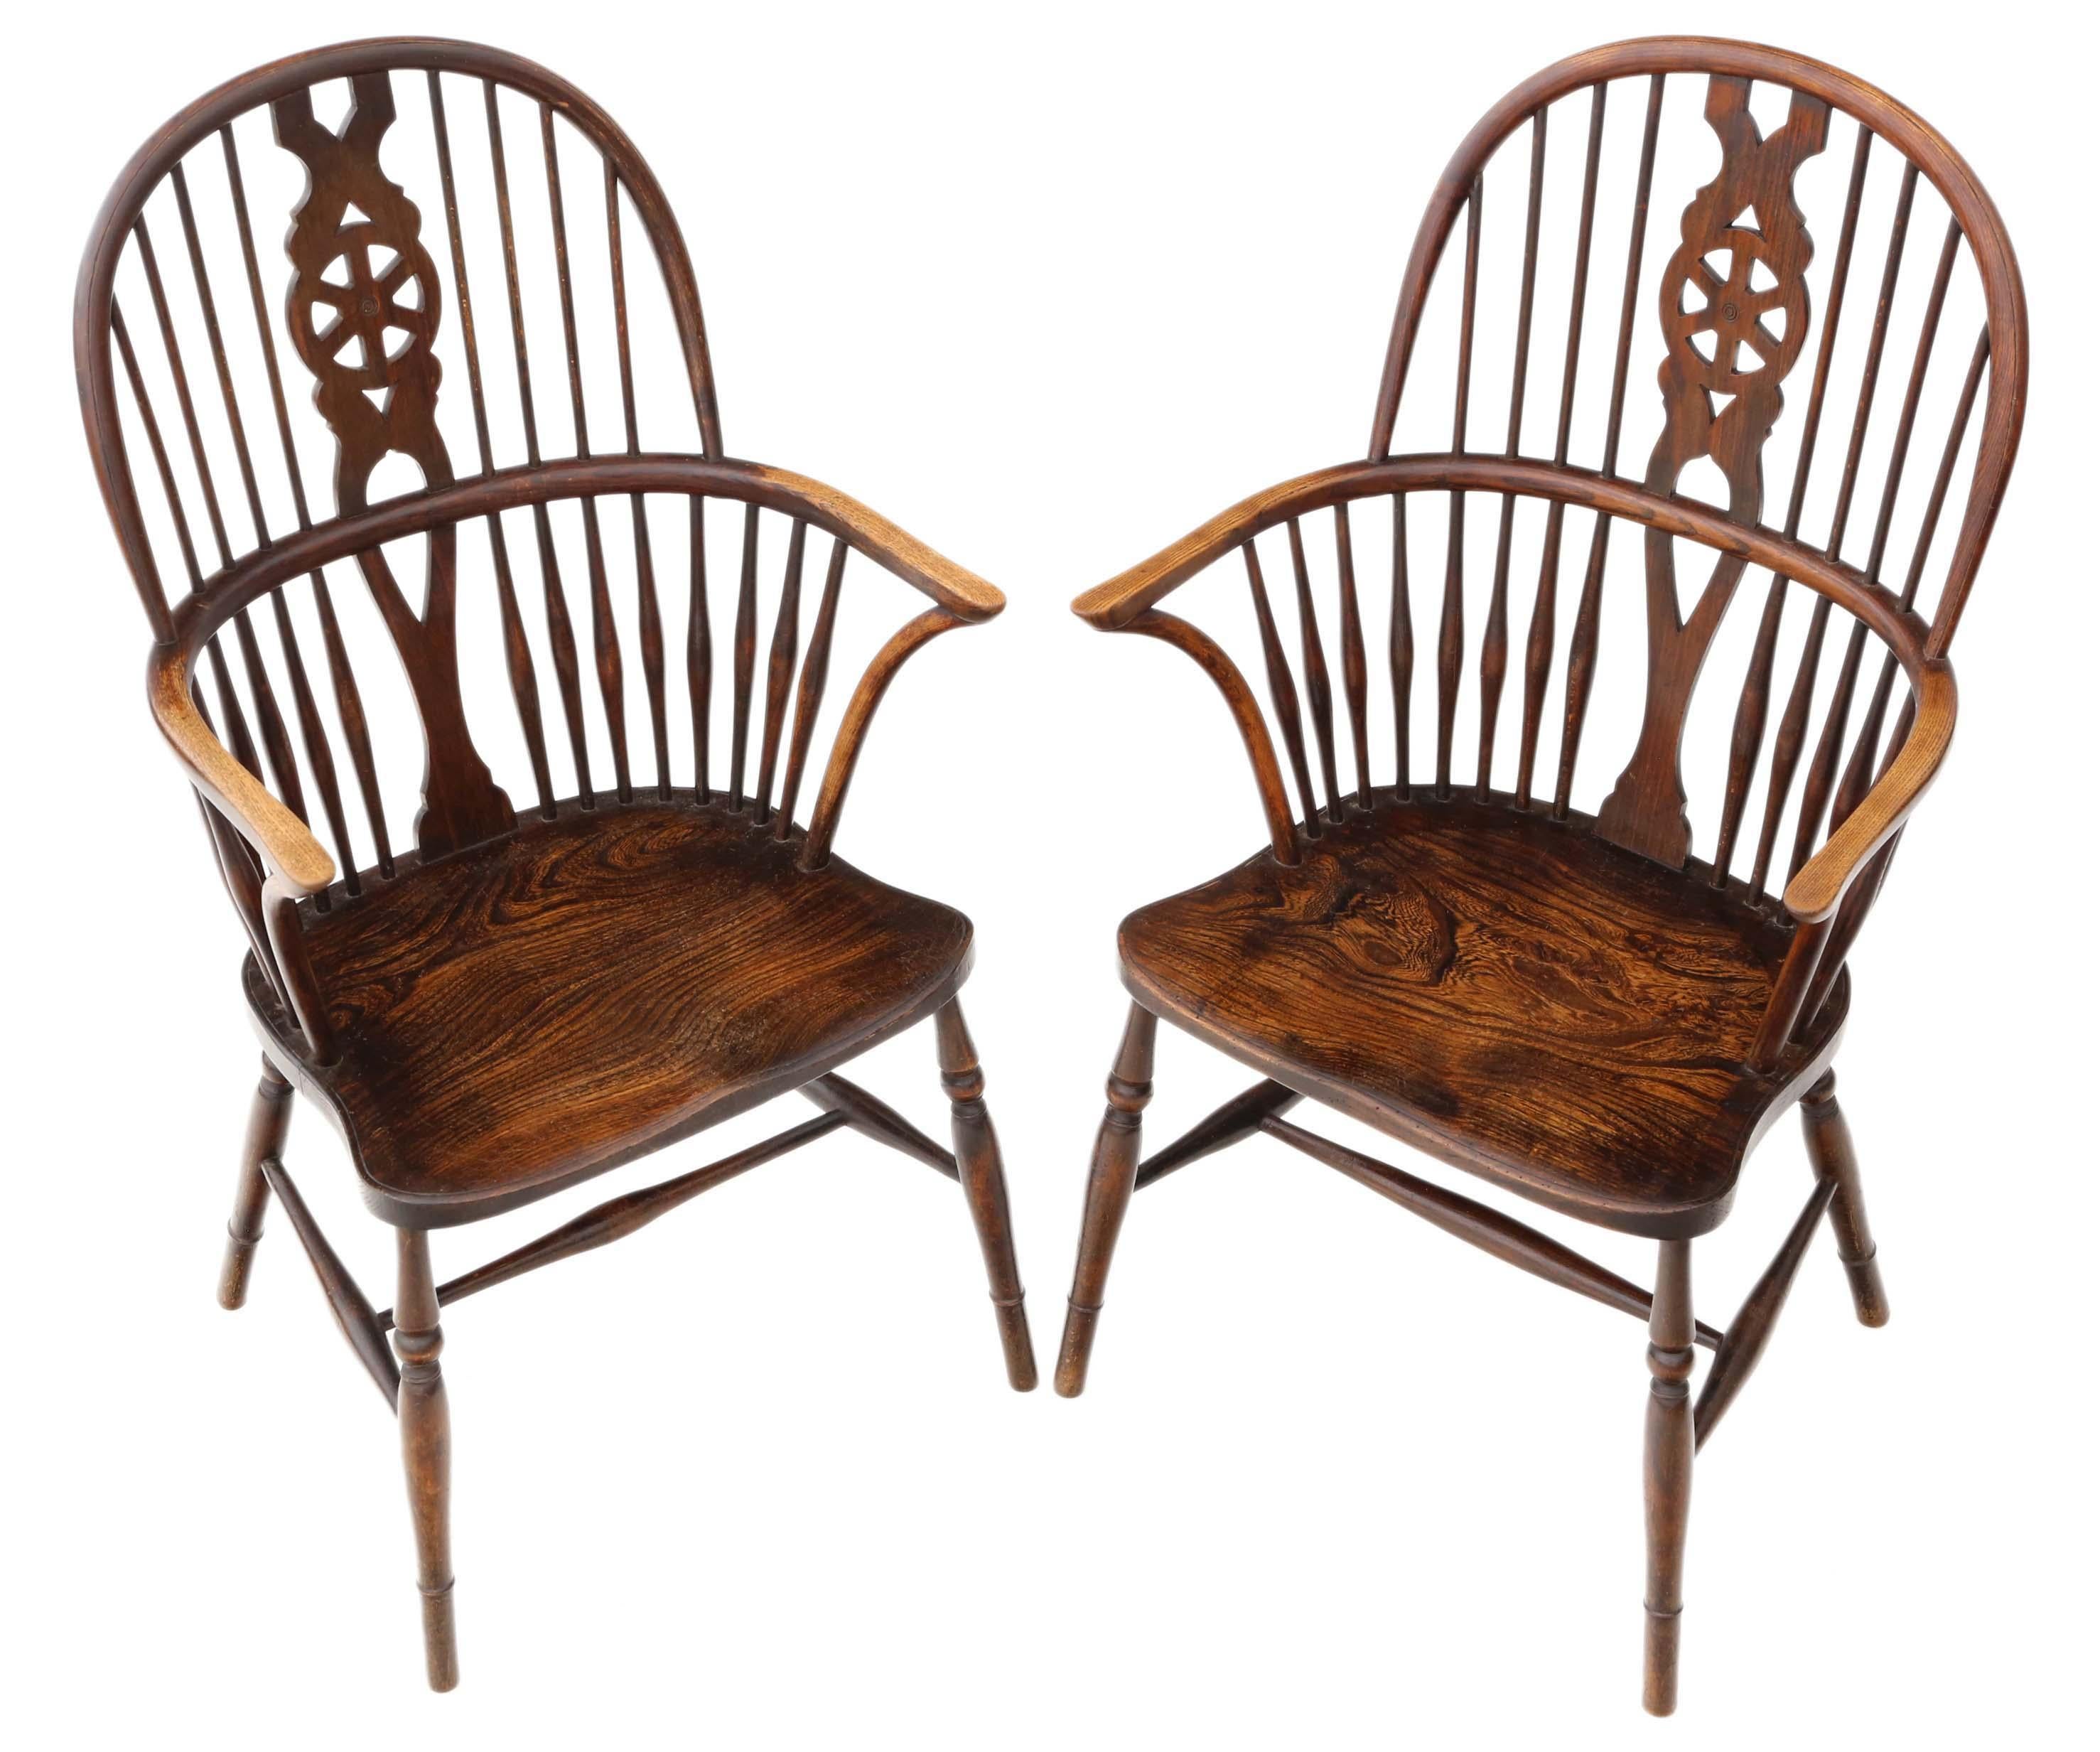 Pair of Trevor Page circa 1920 ash and elm Windsor chairs armchairs.
Solid and no loose joints. Full of age, character and charm. Very decorative chairs. Lovely wear and patination to the arms and seats.
Would look great in the right